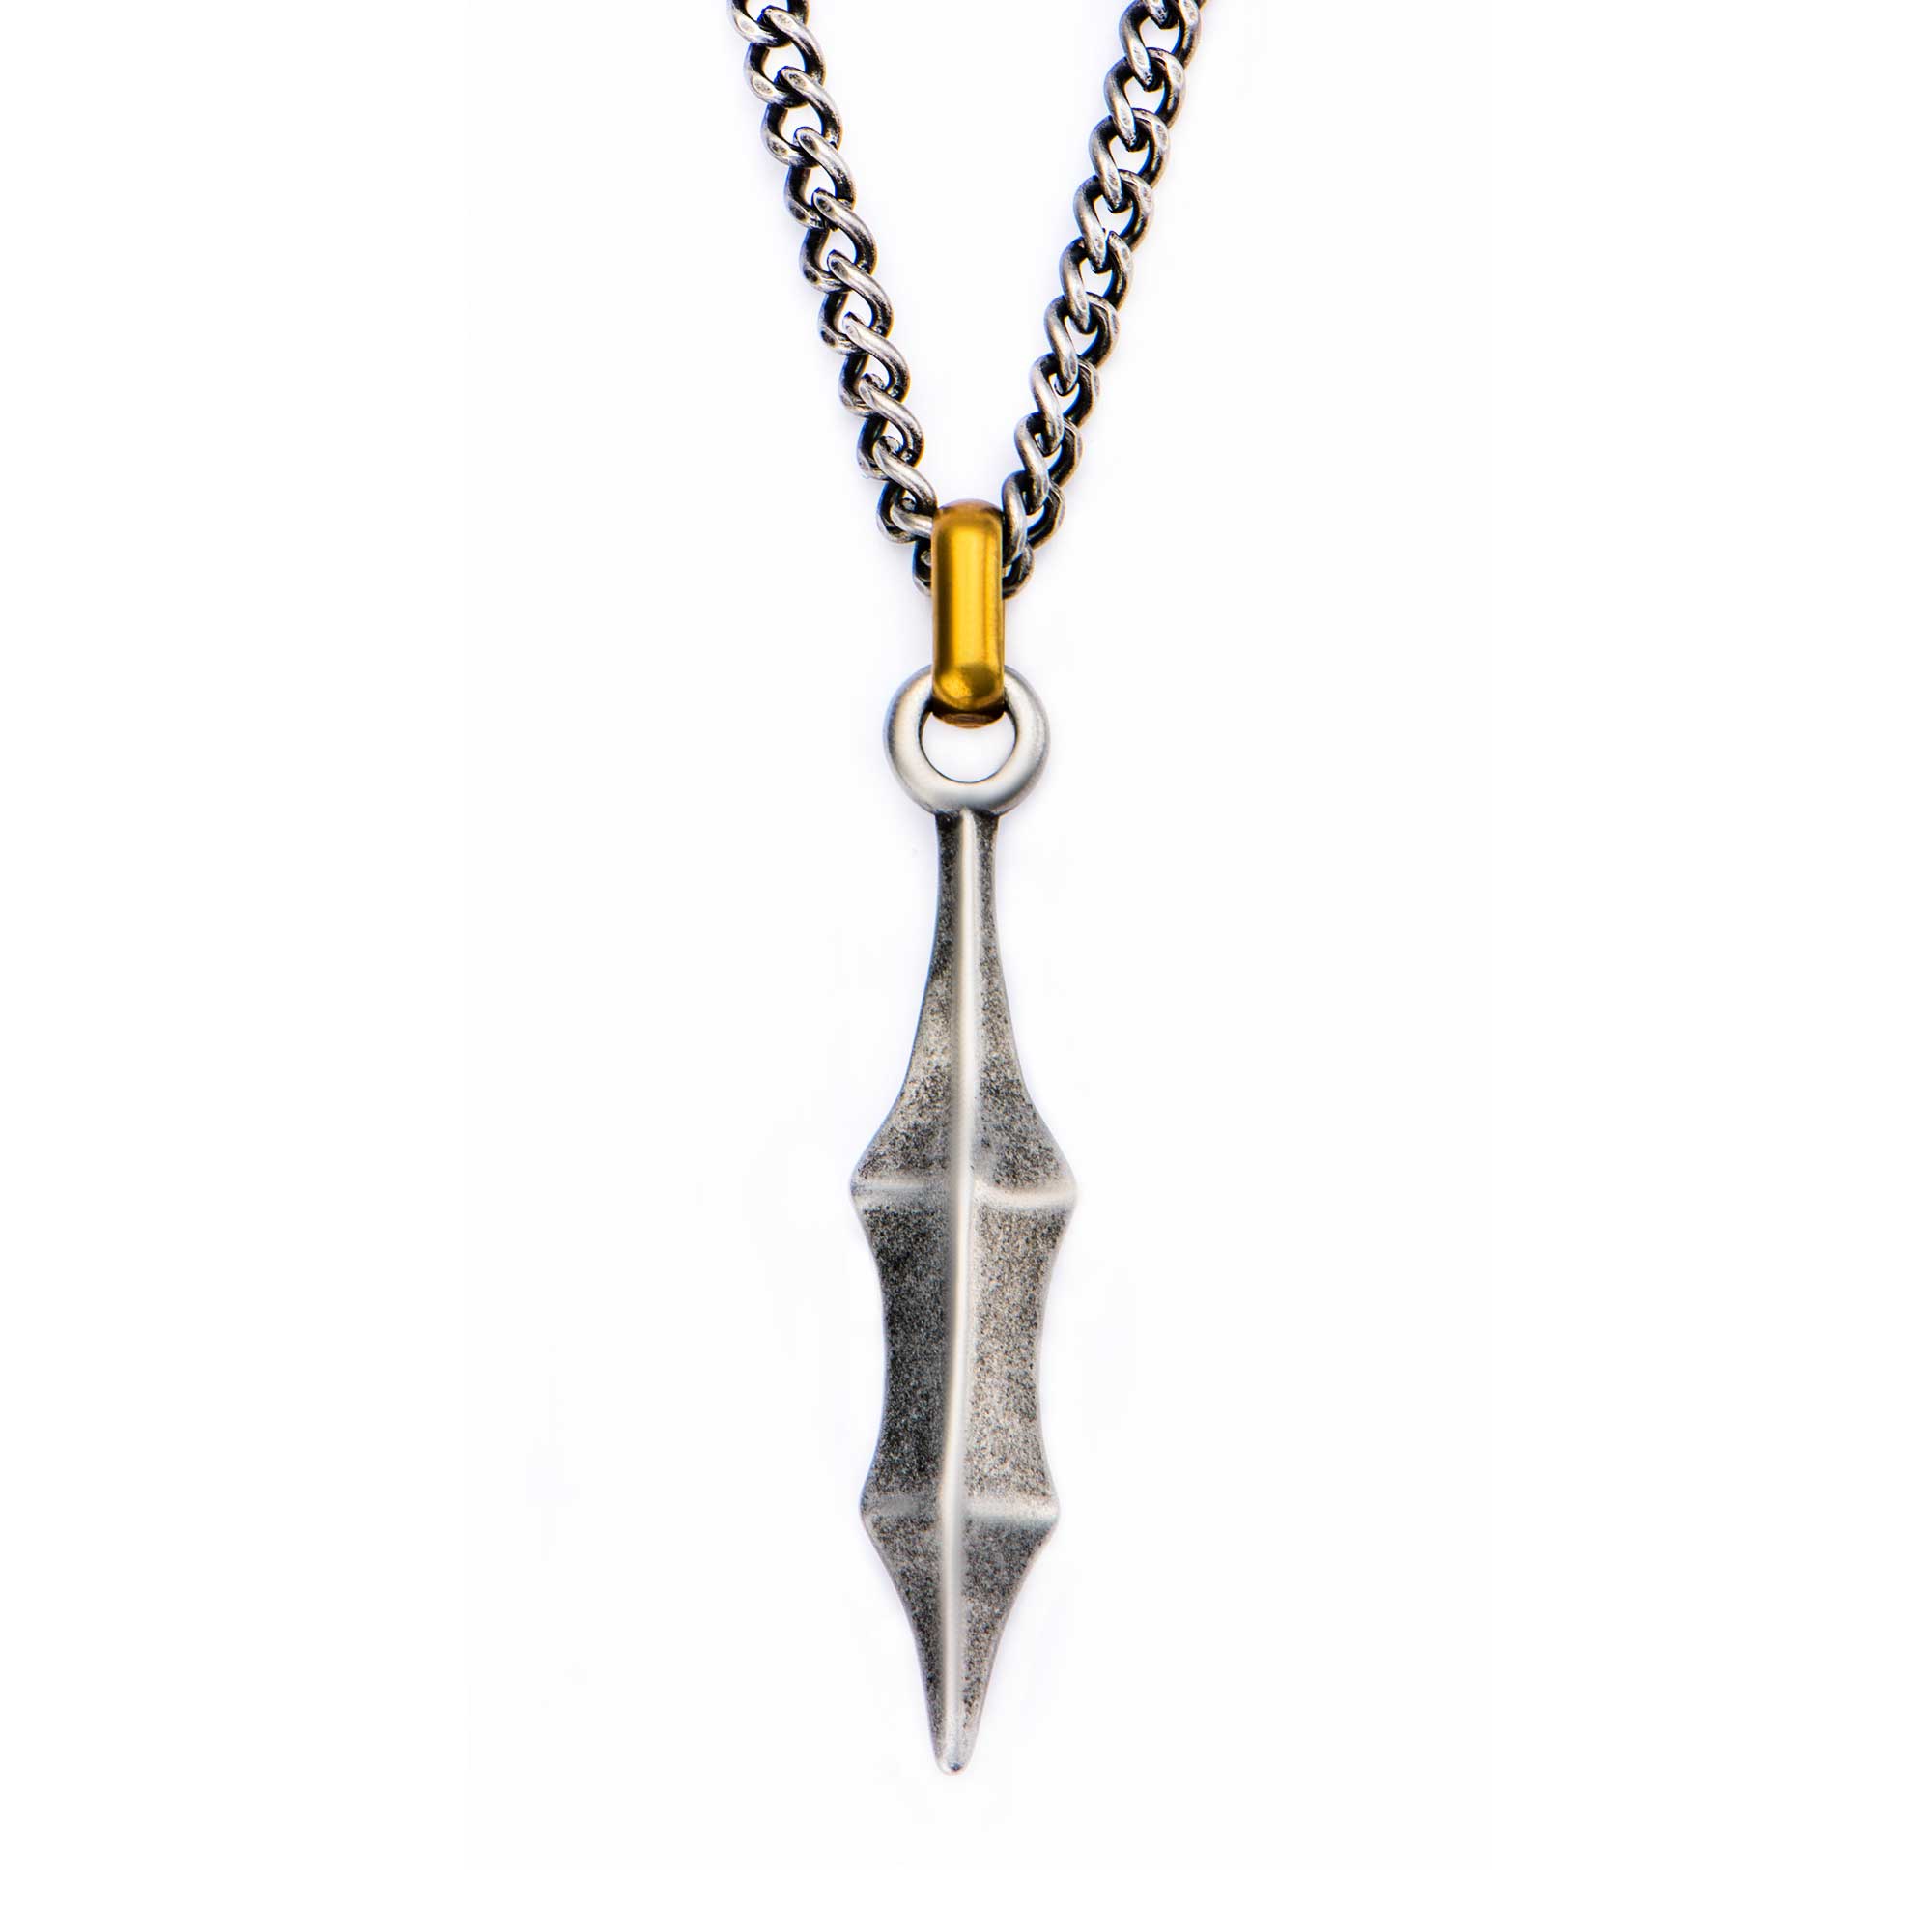 Antique Finish with an Antiqued Gold Plated Bail Medieval Blade Pendant Mitchell's Jewelry Norman, OK